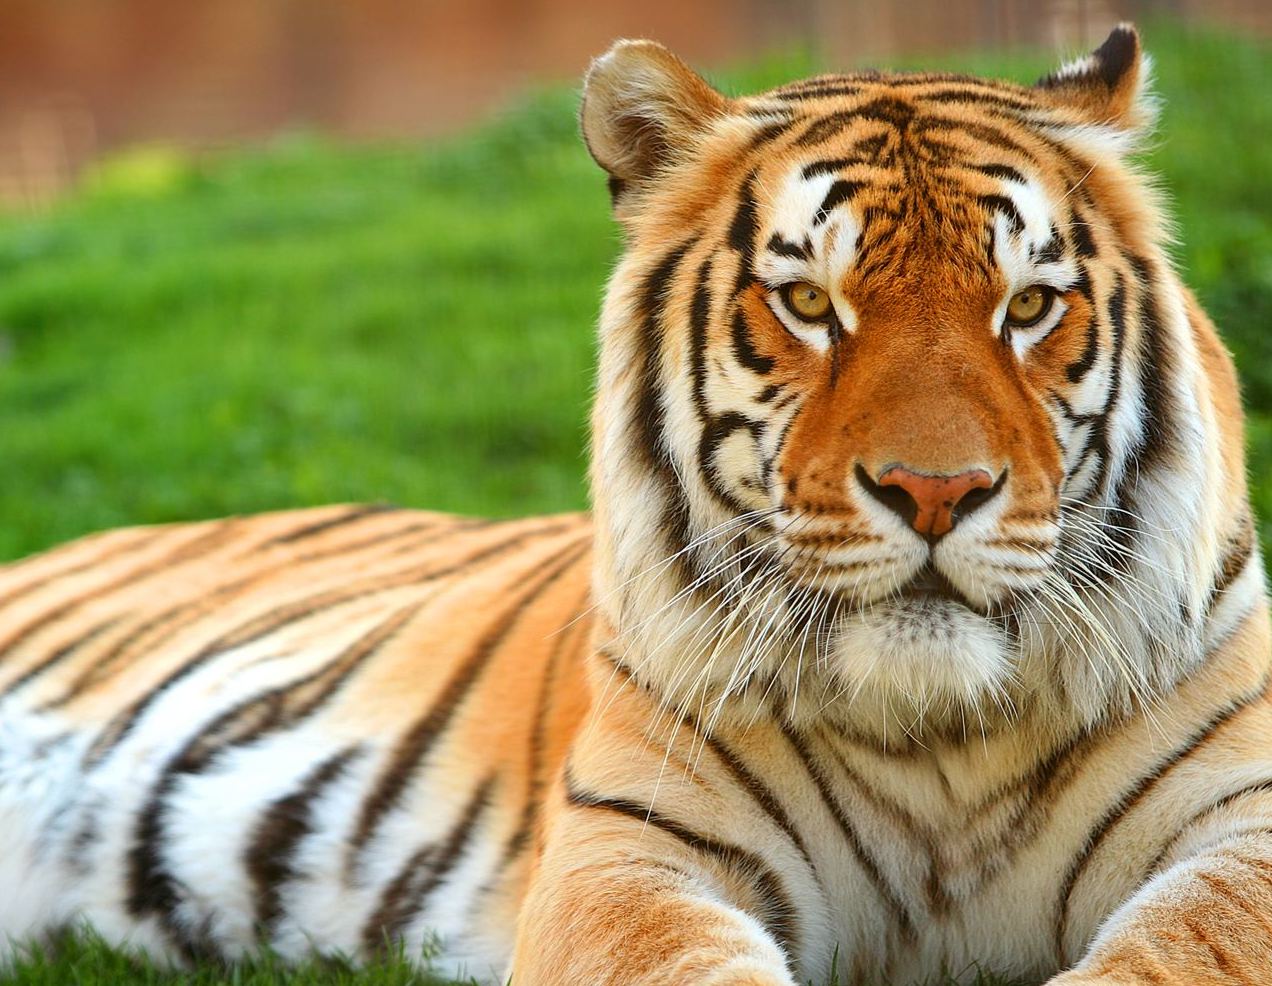 Tiger pictures wallpaper